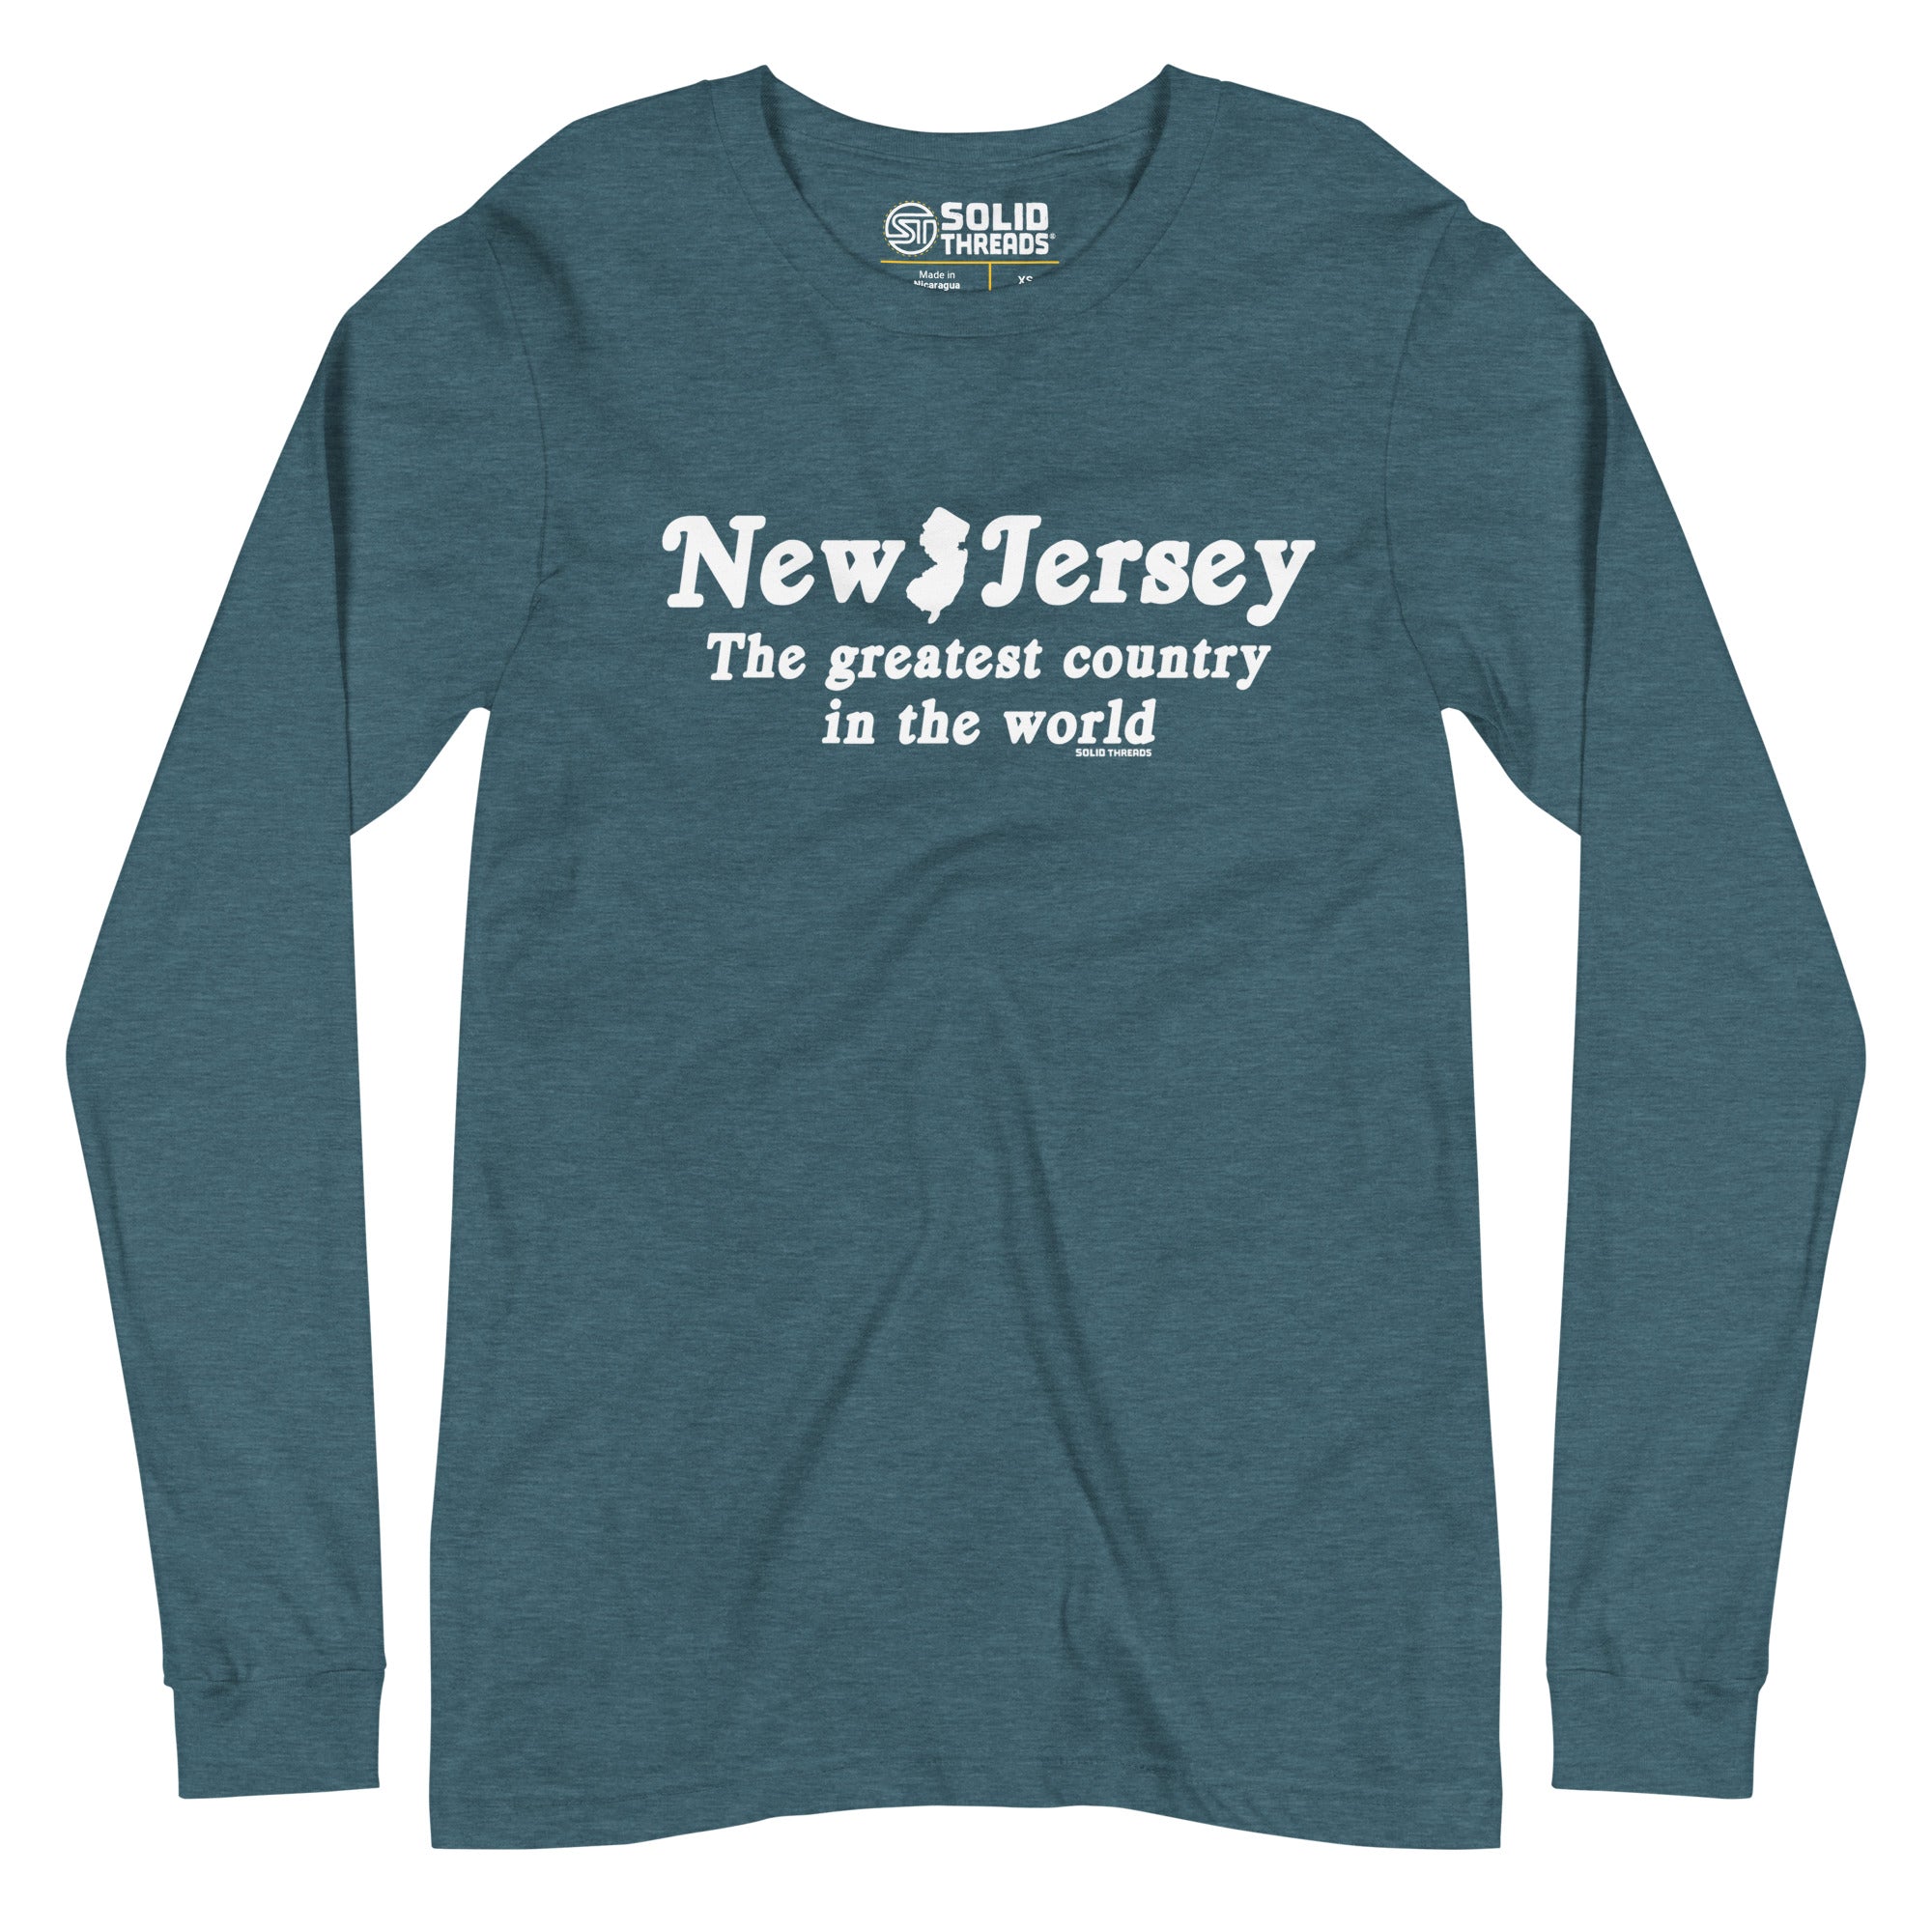 New Jersey The Greatest Country In The World Vintage Teal Long Sleeve T Shirt | Funny Garden State Graphic Tee | Solid Threads